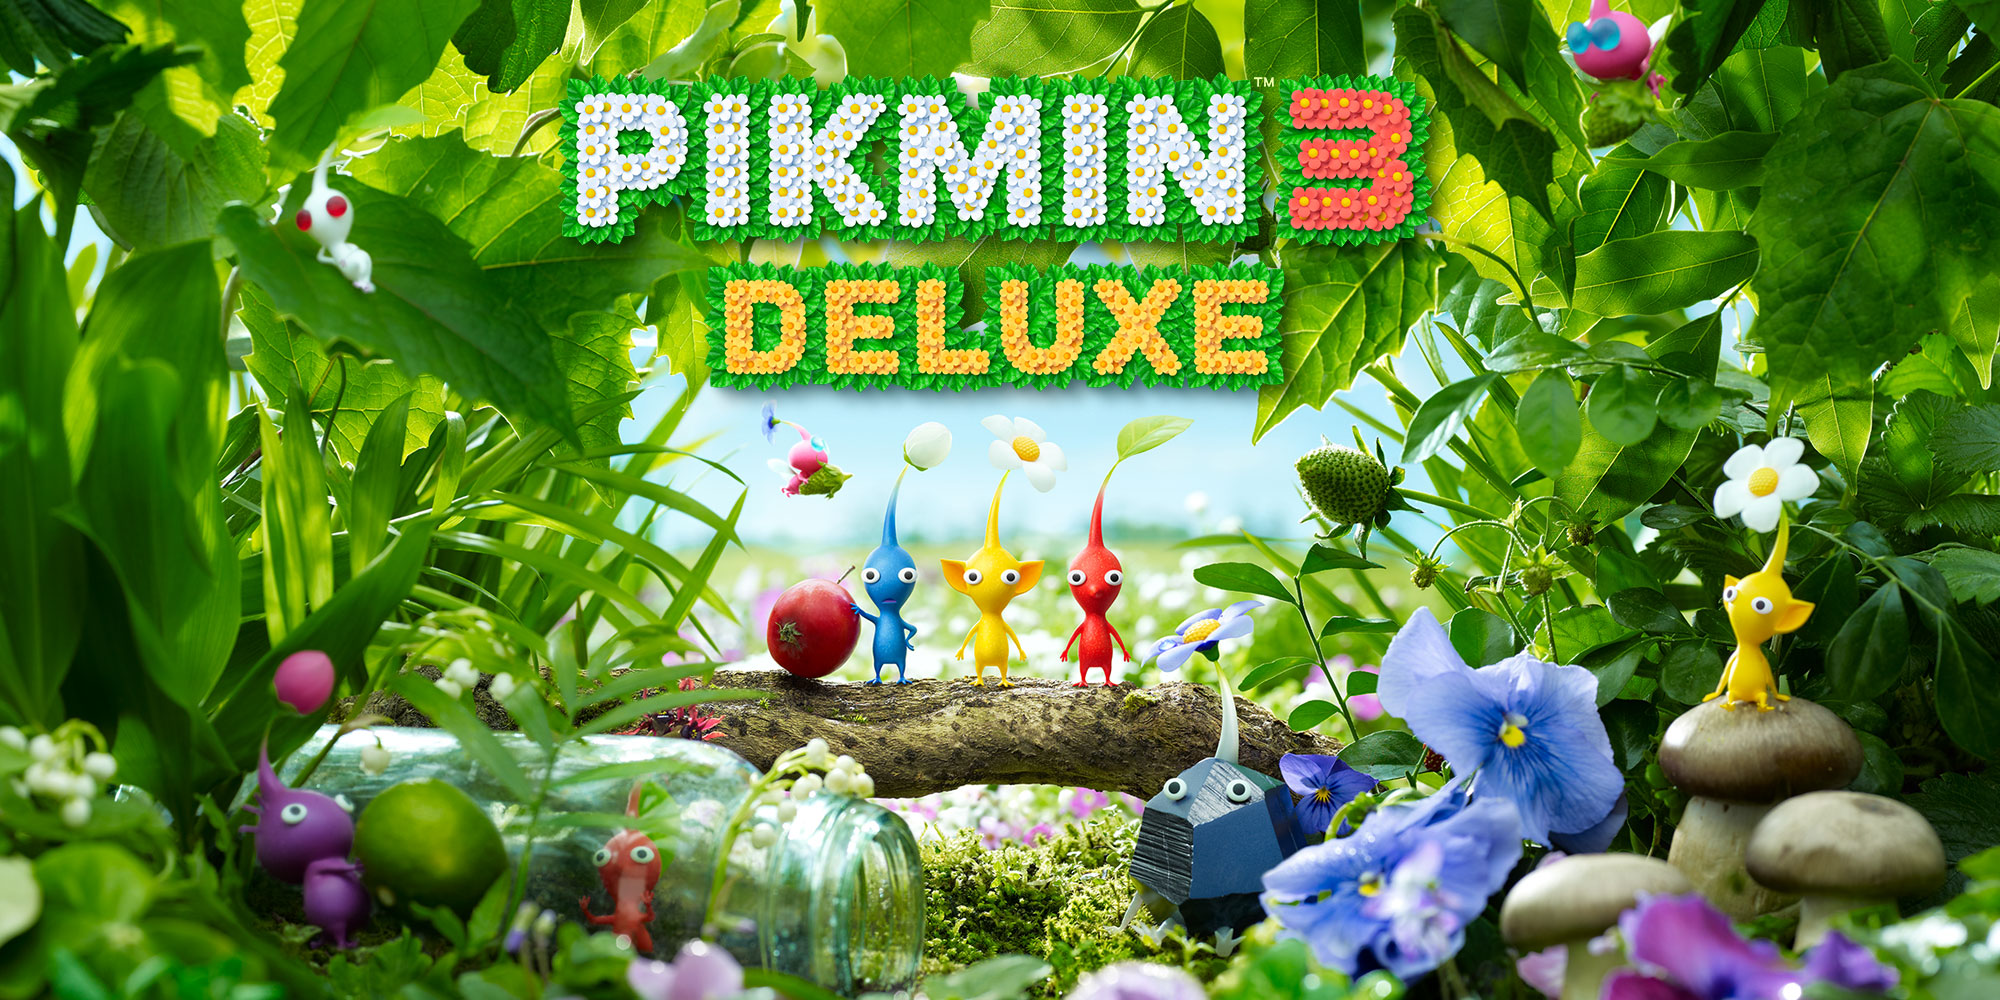 H2x1_NSwitch_Pikmin3Deluxe.jpg